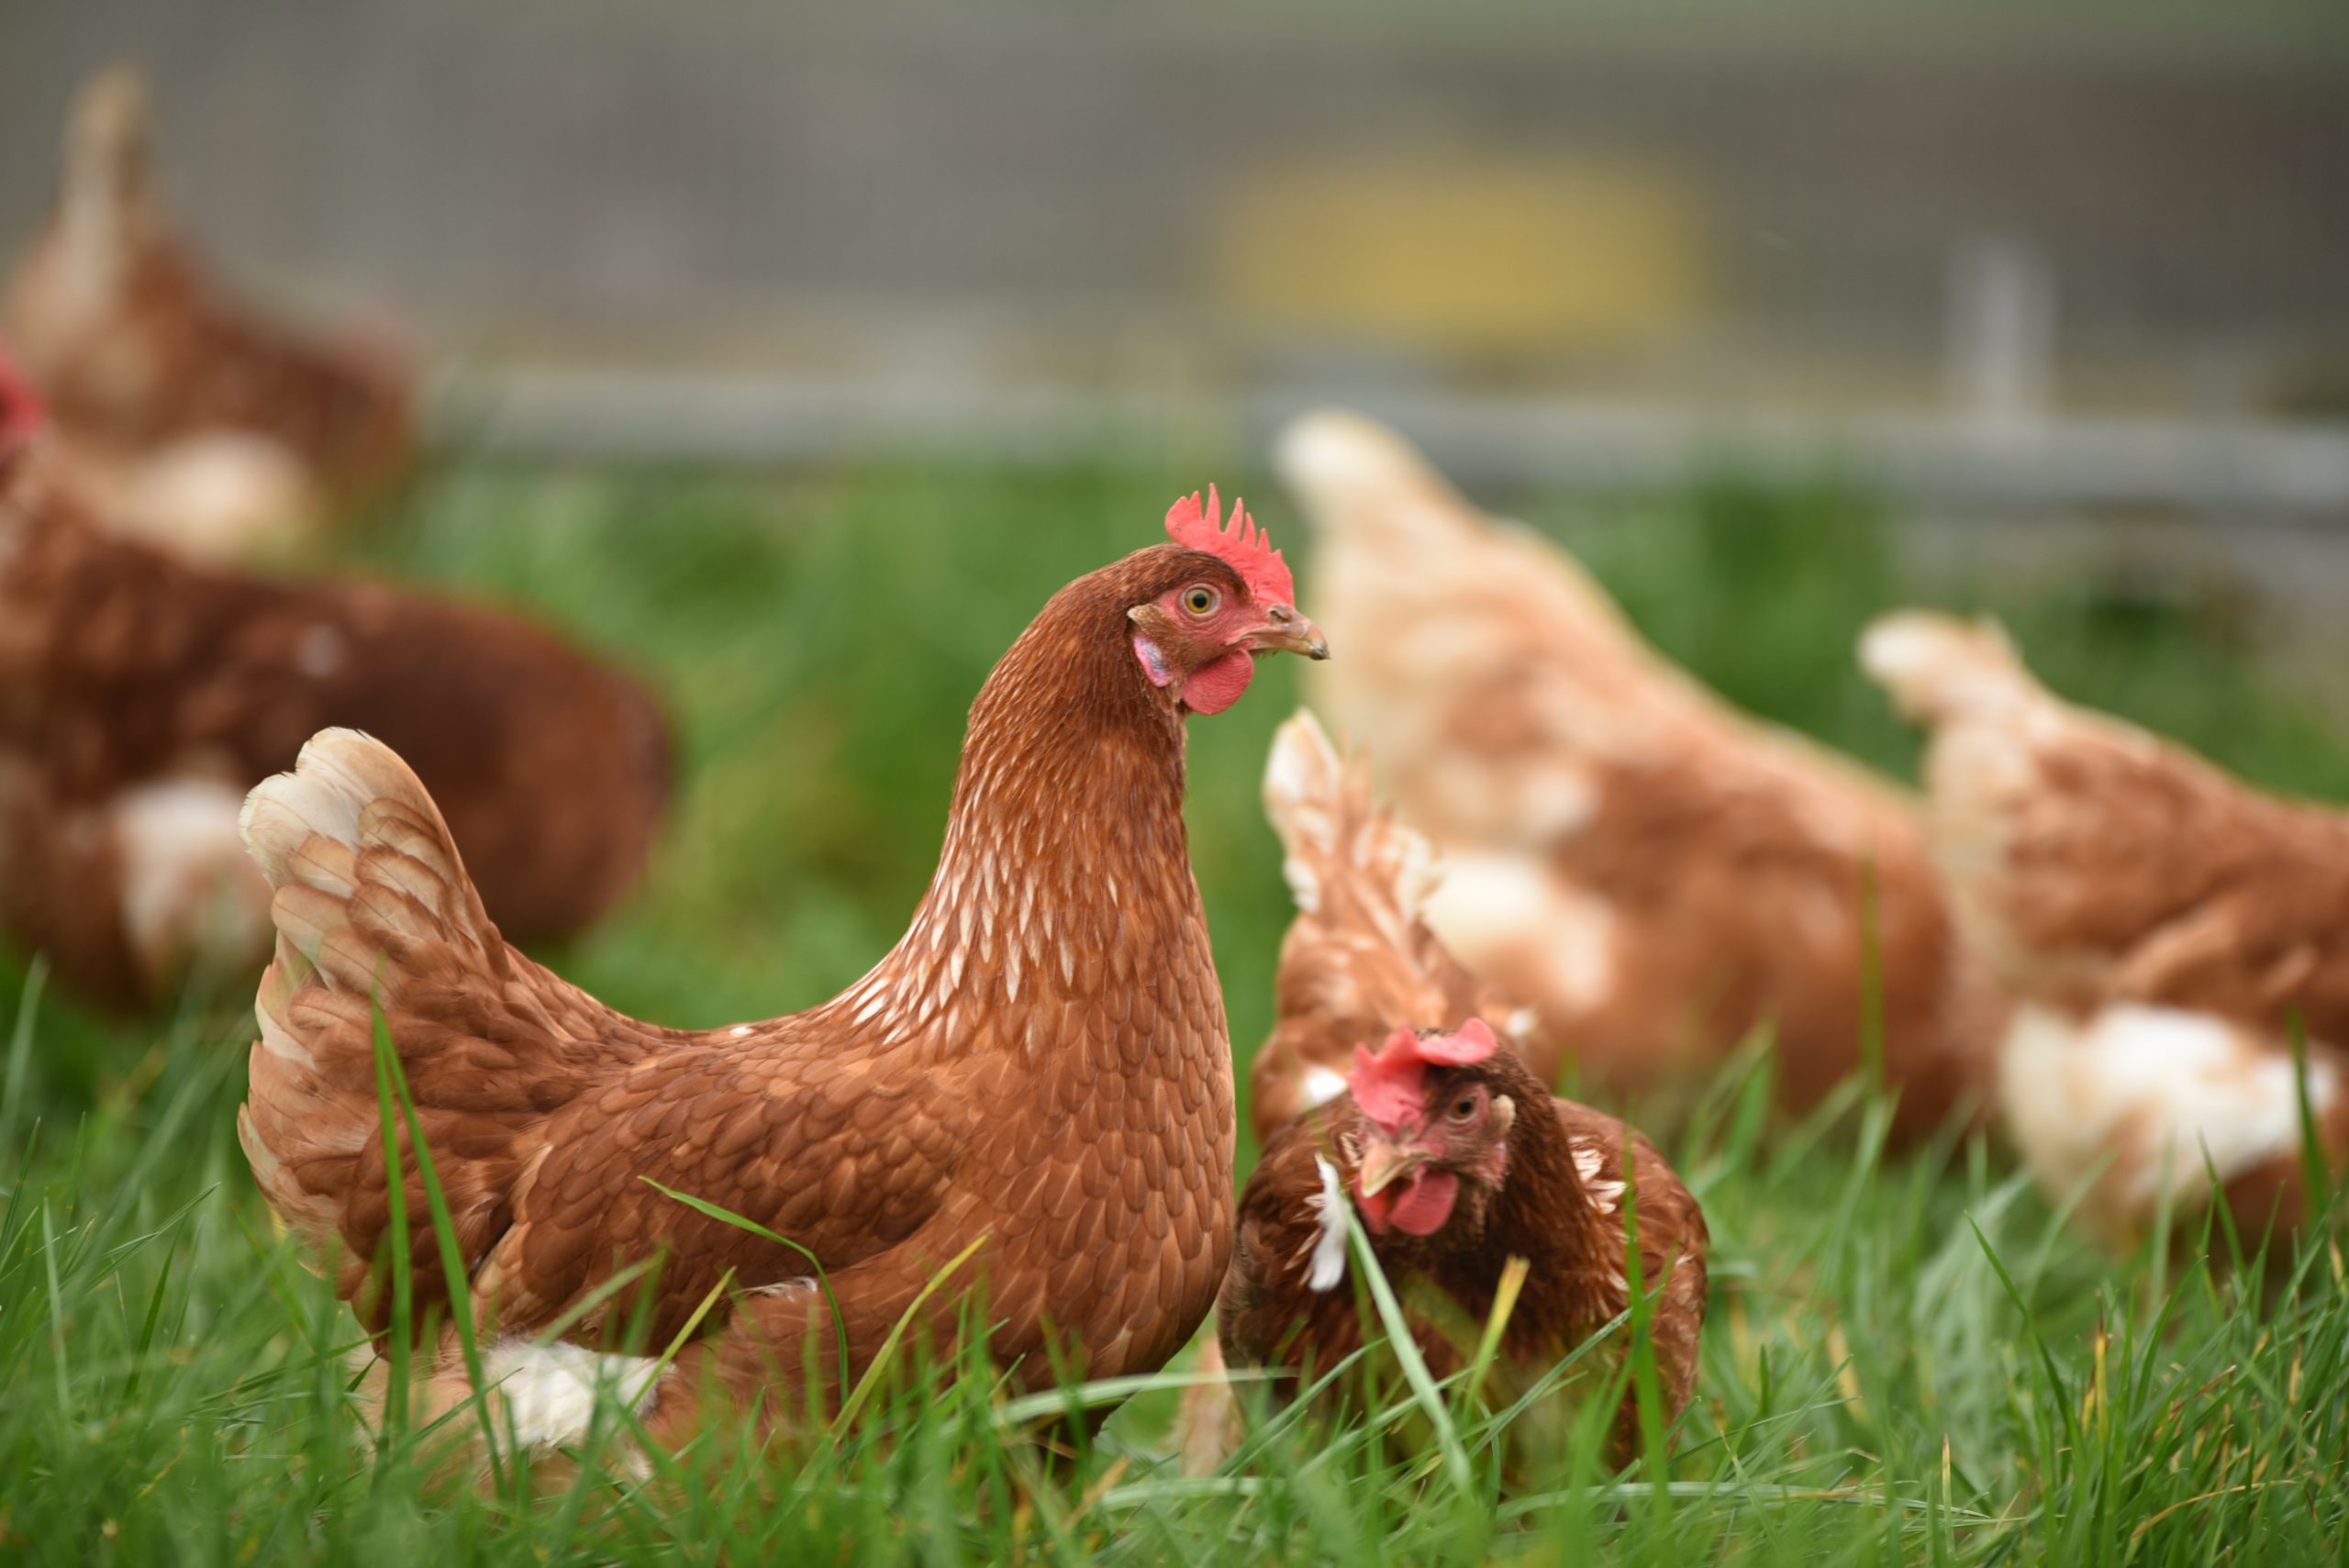 Can Chickens Eat Iceberg Lettuce? Is It Safe?